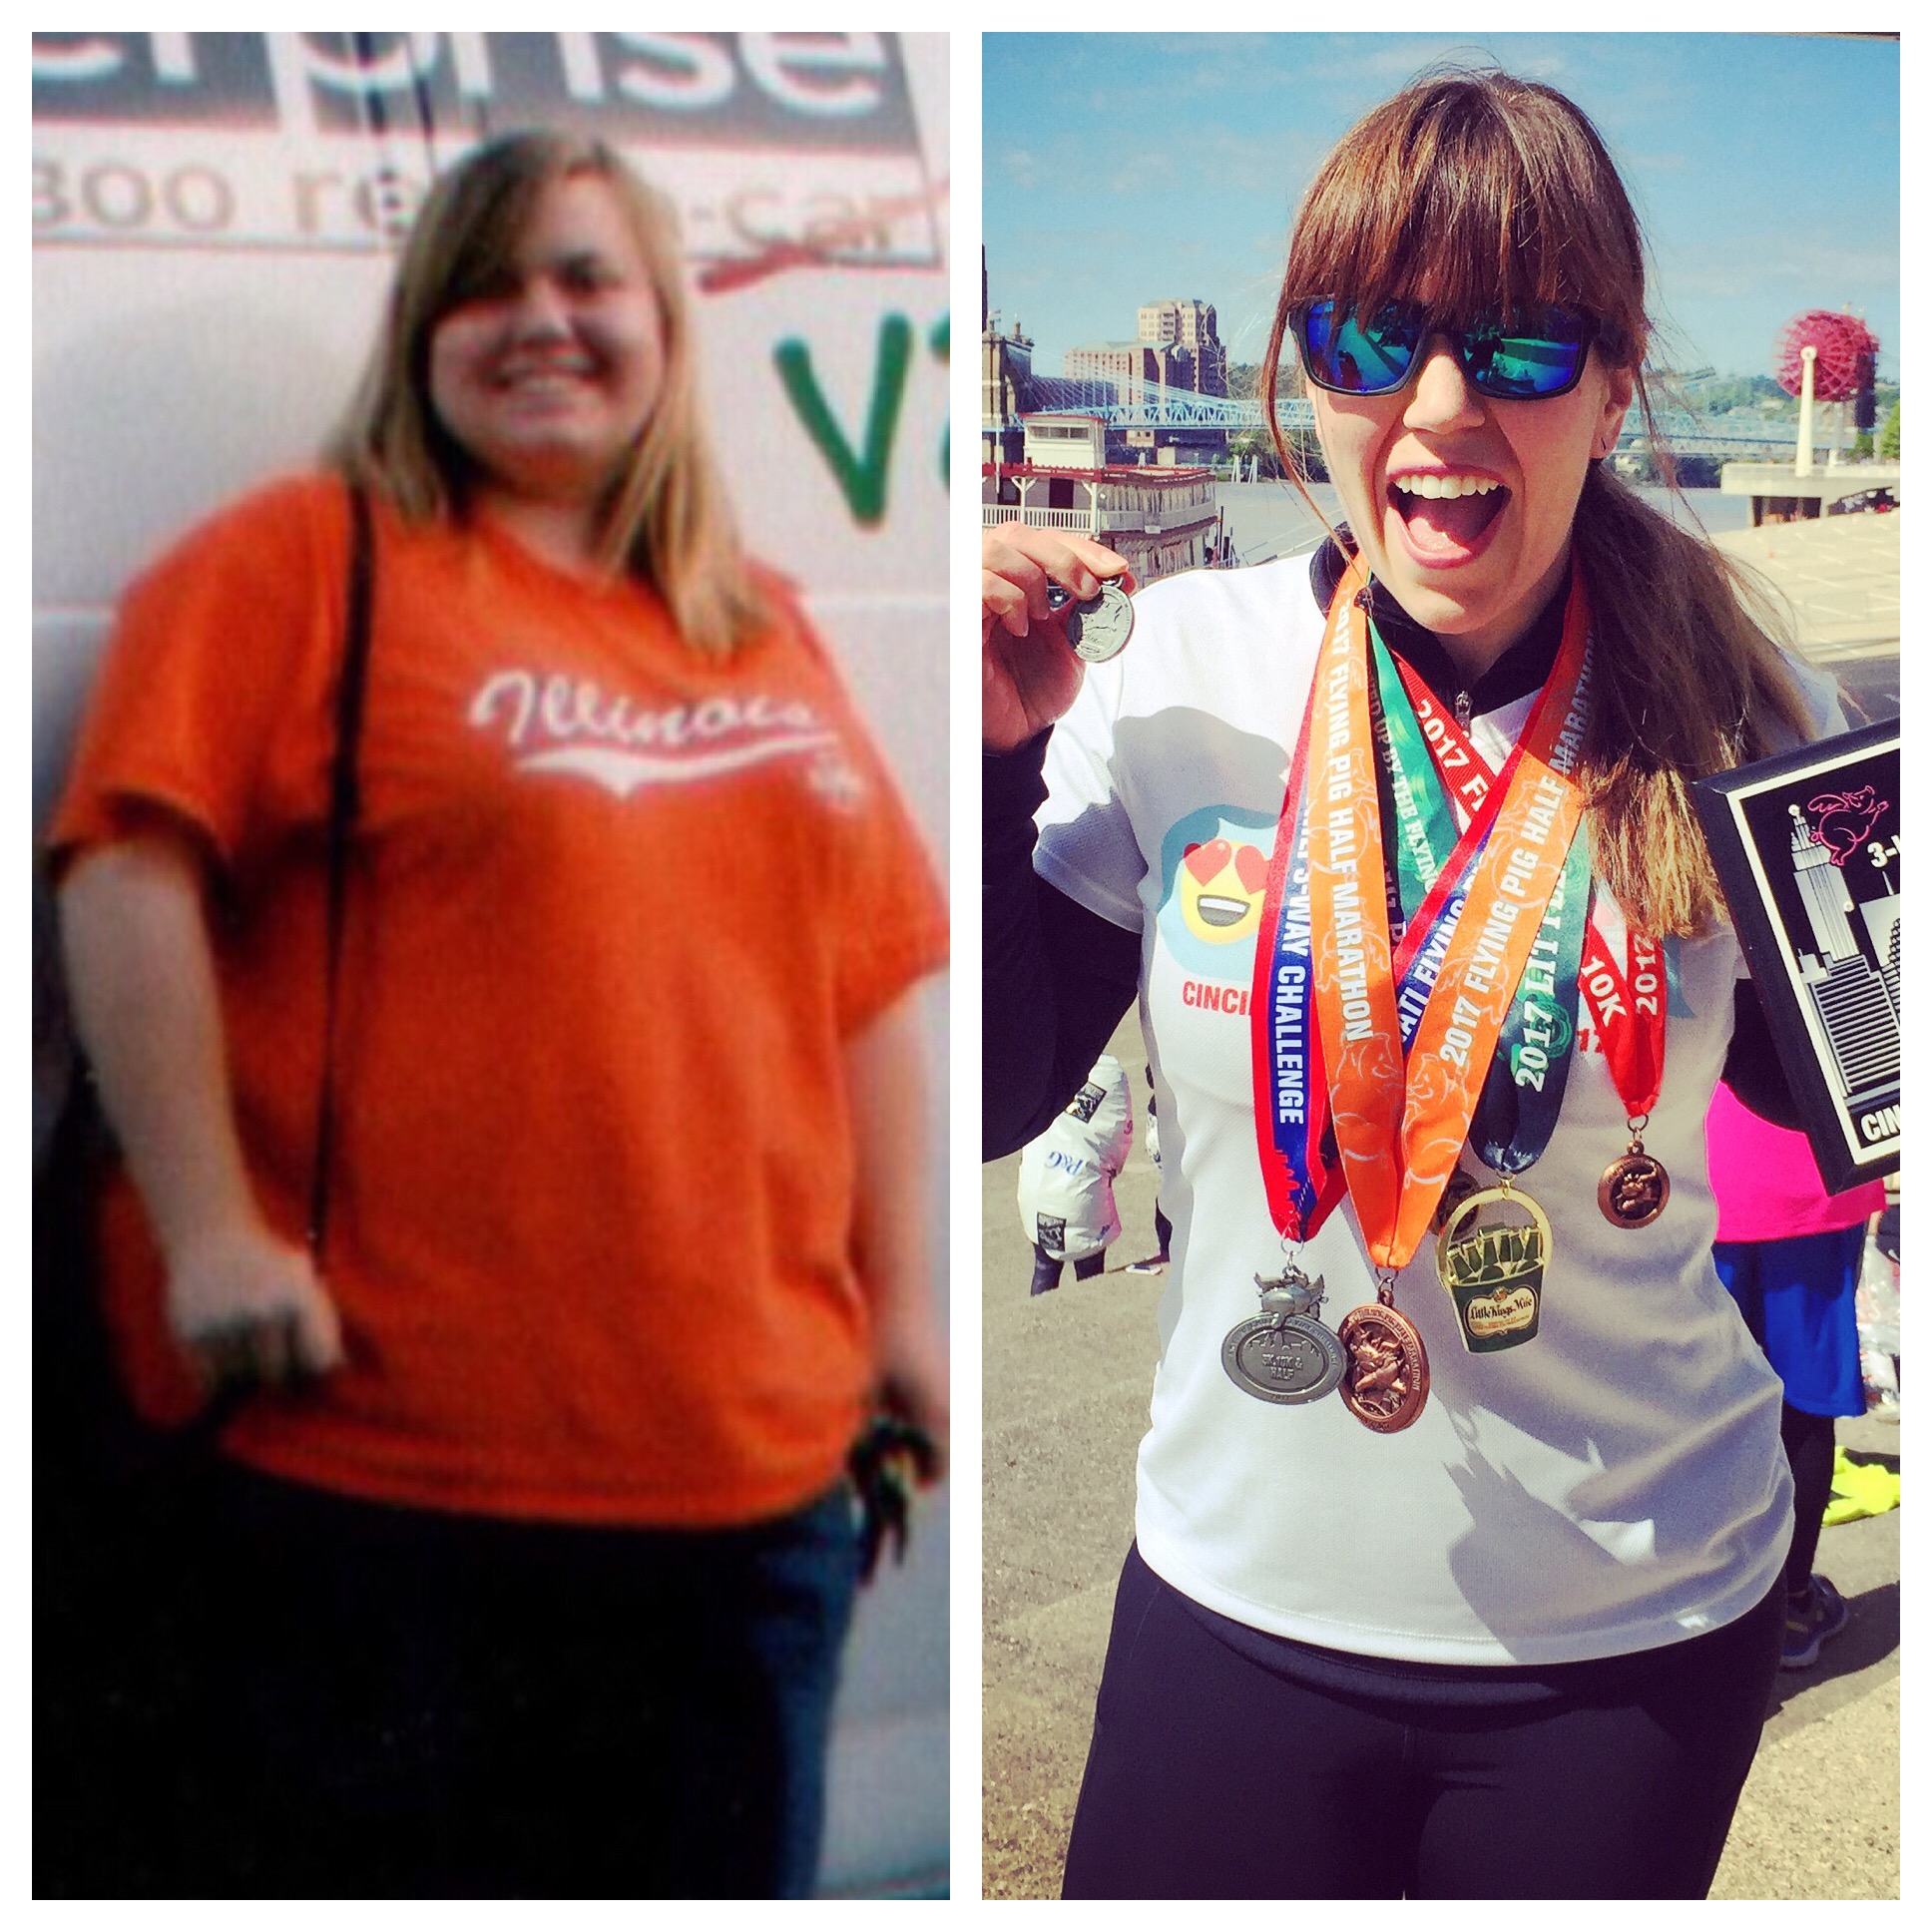 Amanda Valentine, Pound This podcast host, lost more than 100 pounds from diet and exercise.